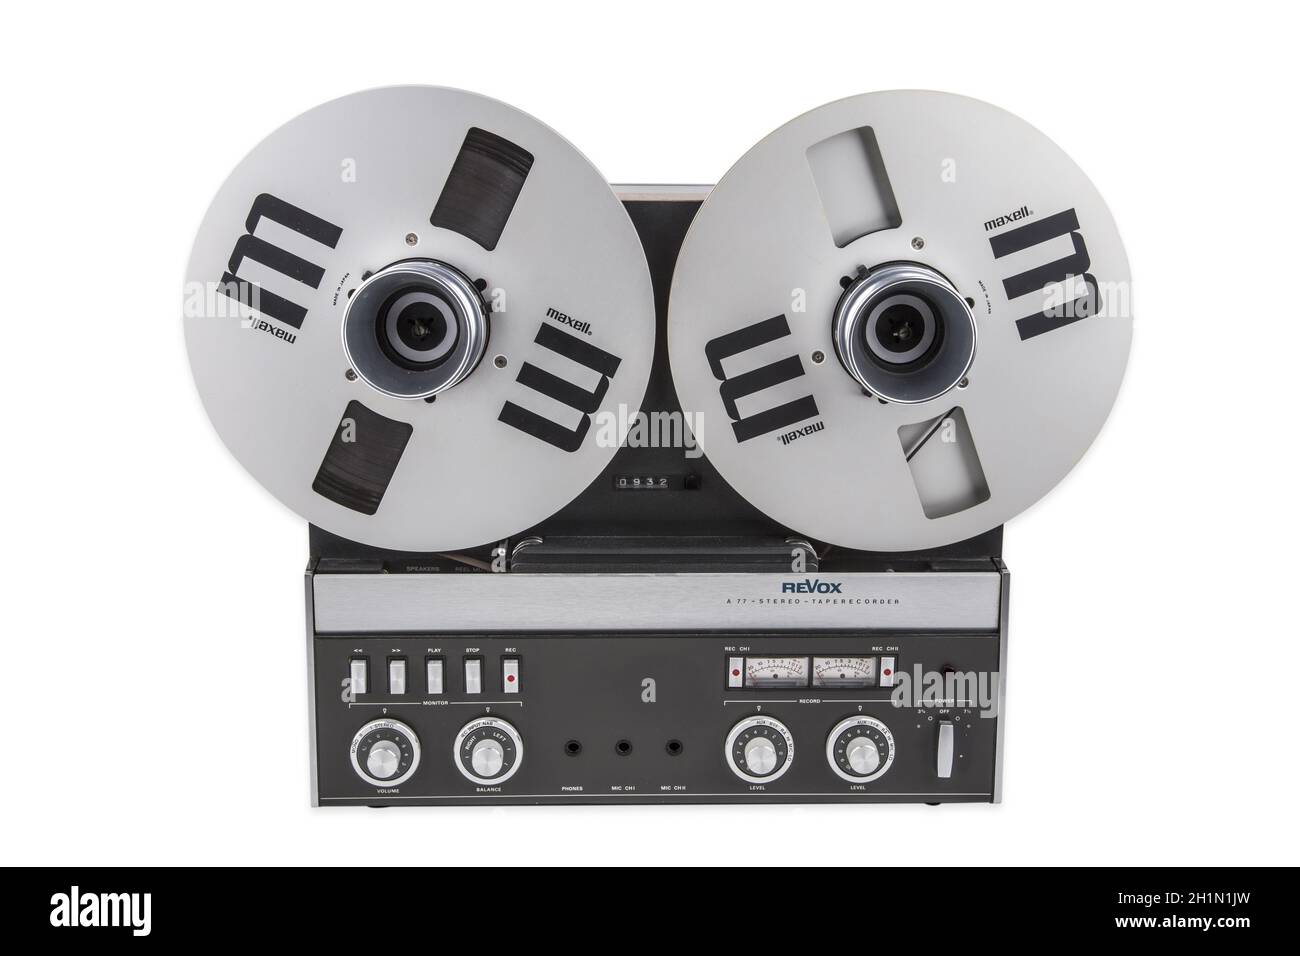 Wetzlar, GERMANY 2020-12-05: REVOX A 77 Professional studio audio tape deck. Revox was founded in 1948 by the Swiss entrepreneur Willi Studer to manuf Stock Photo